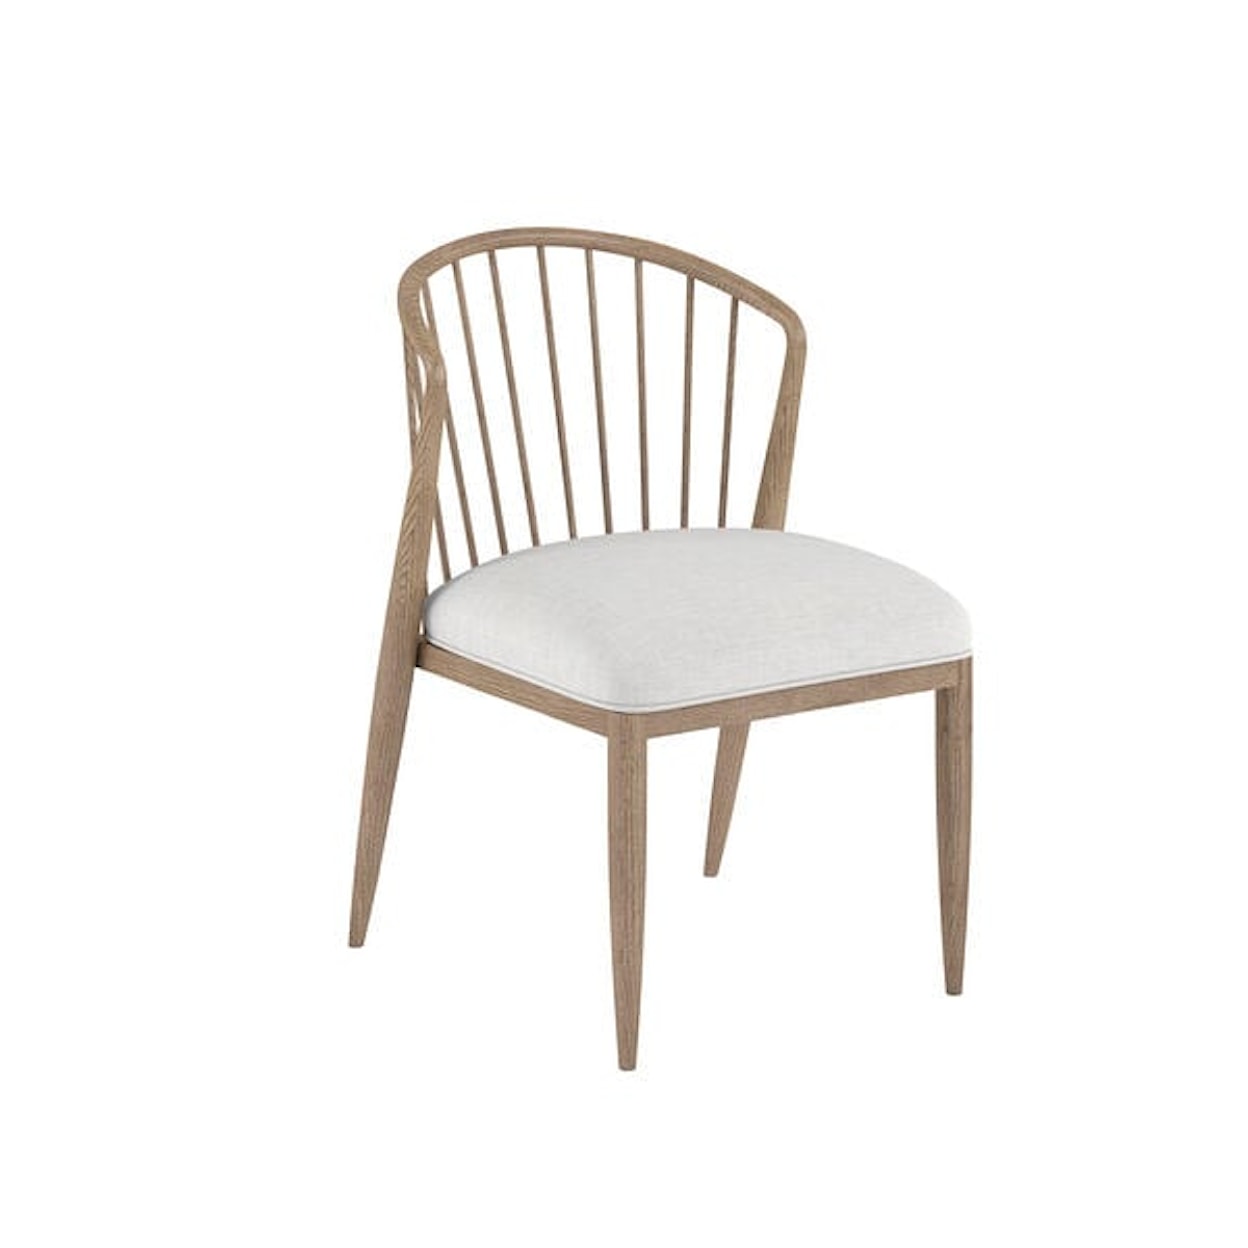 A.R.T. Furniture Inc Finn Spindle Back Dining Chair